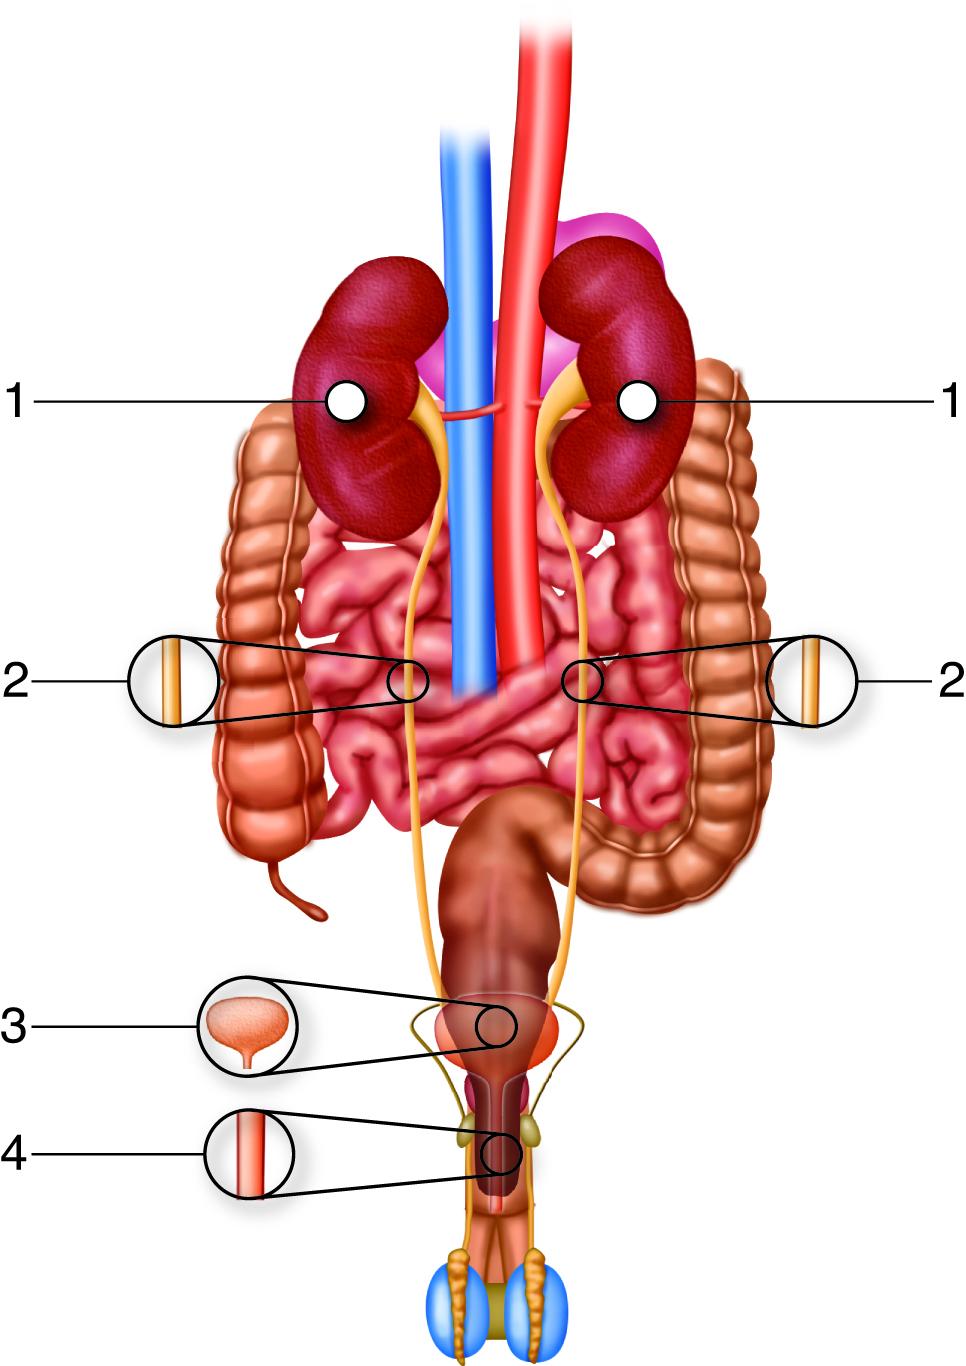 10 Symptoms of renal artery stenosis You Should Never Ignore